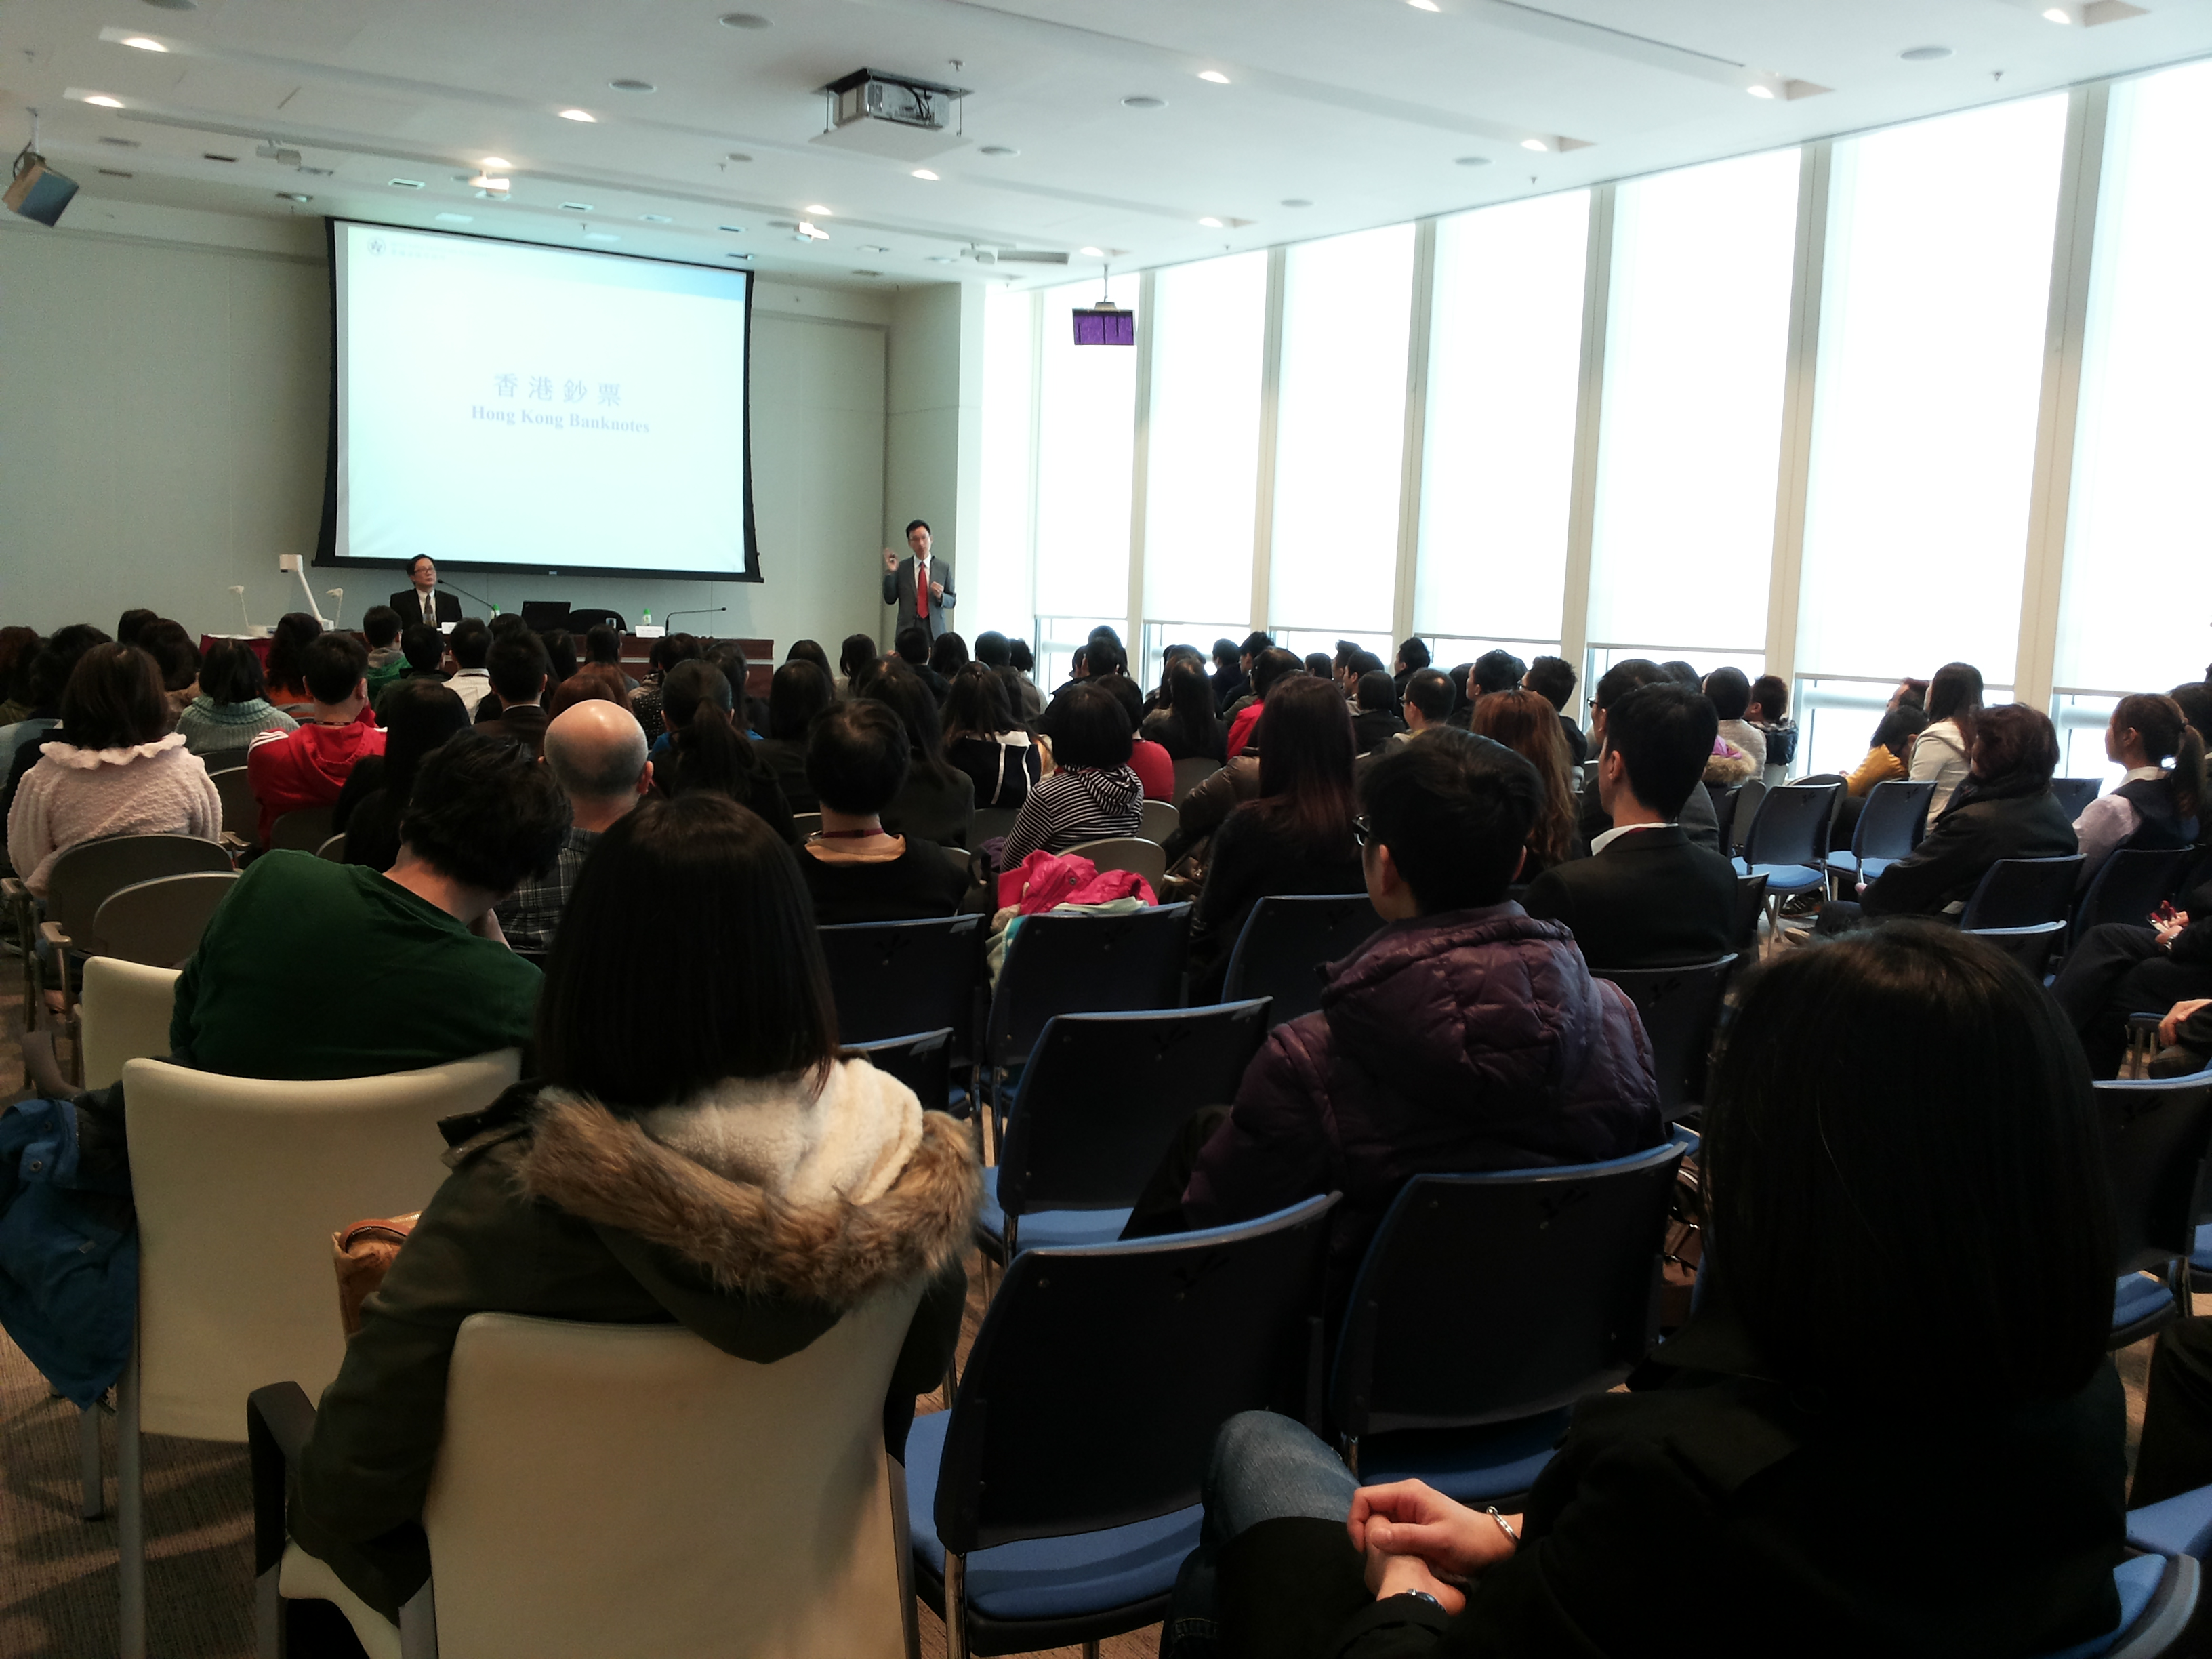 In the past two weeks, the HKMA and the Police organised 15 seminars on identifying counterfeit notes. Some 3,000 people have attended these seminars. Apart from banking staff, the HKMA also invited employees of large retail business and catering operators to attend to help strengthen their ability to detect counterfeit notes.